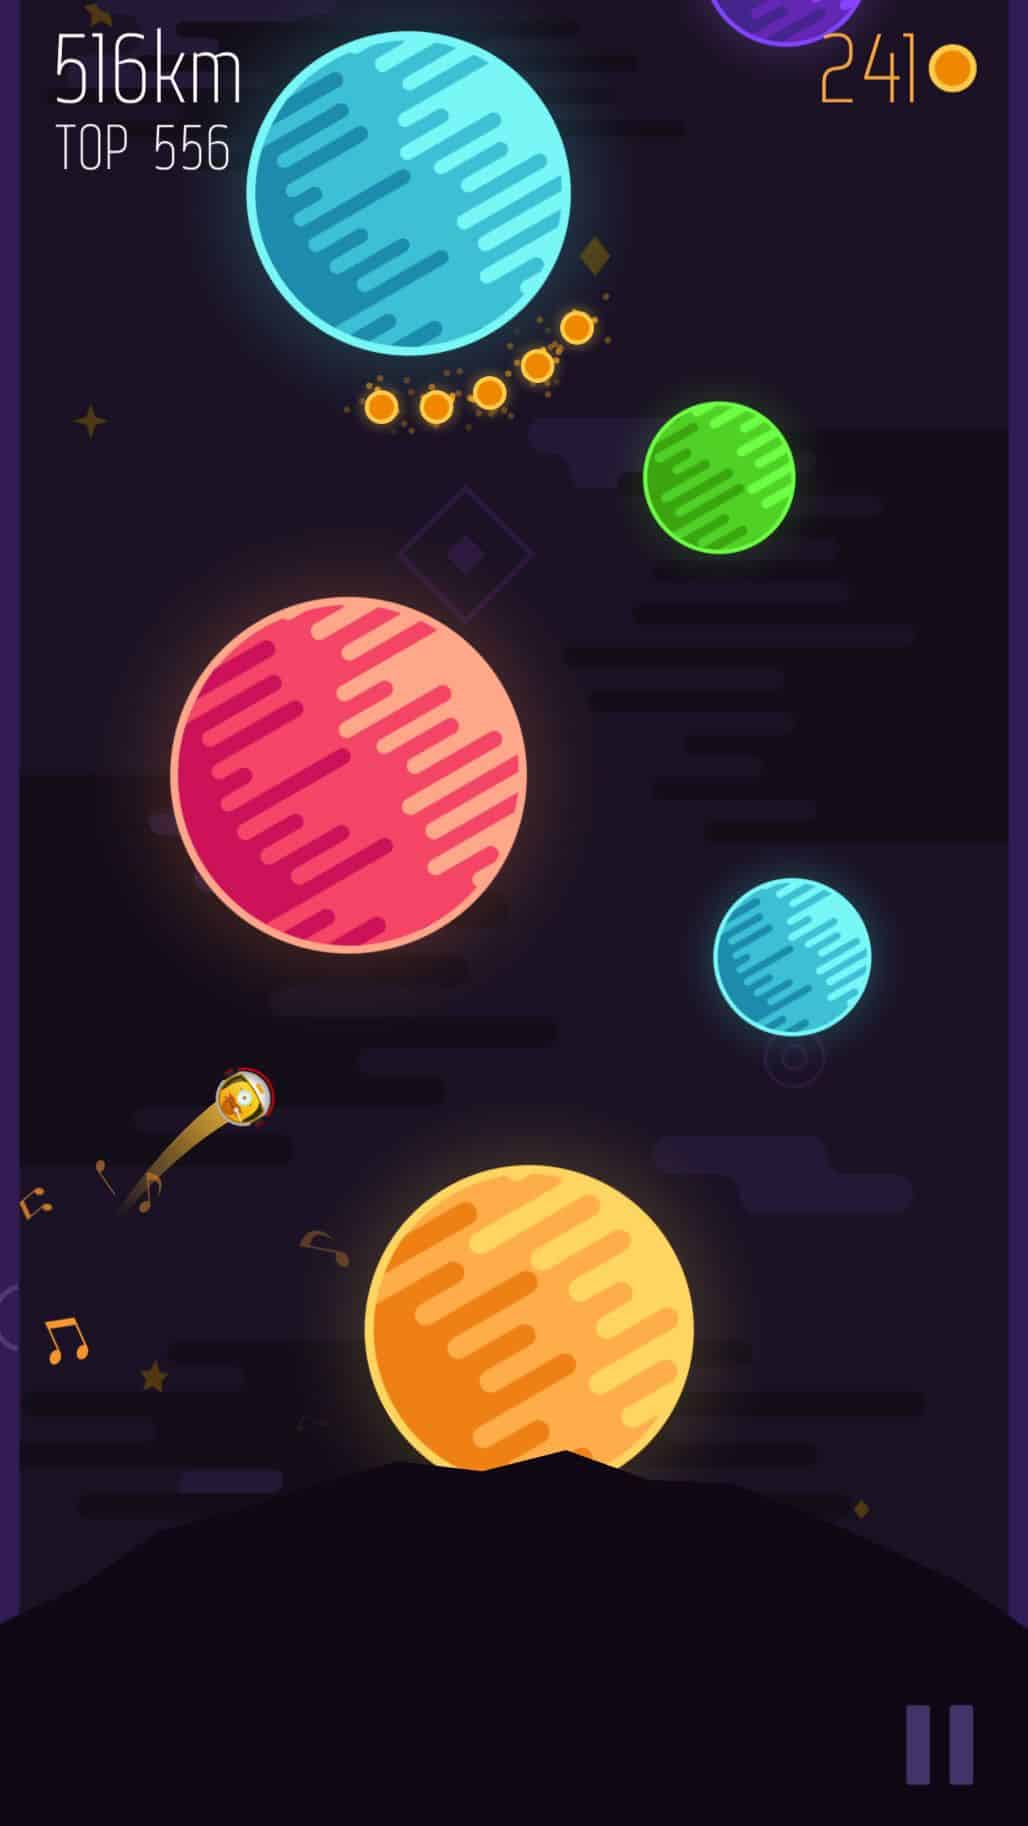 The colorful planets gives a good sense of fun to the app design of Planet Leap